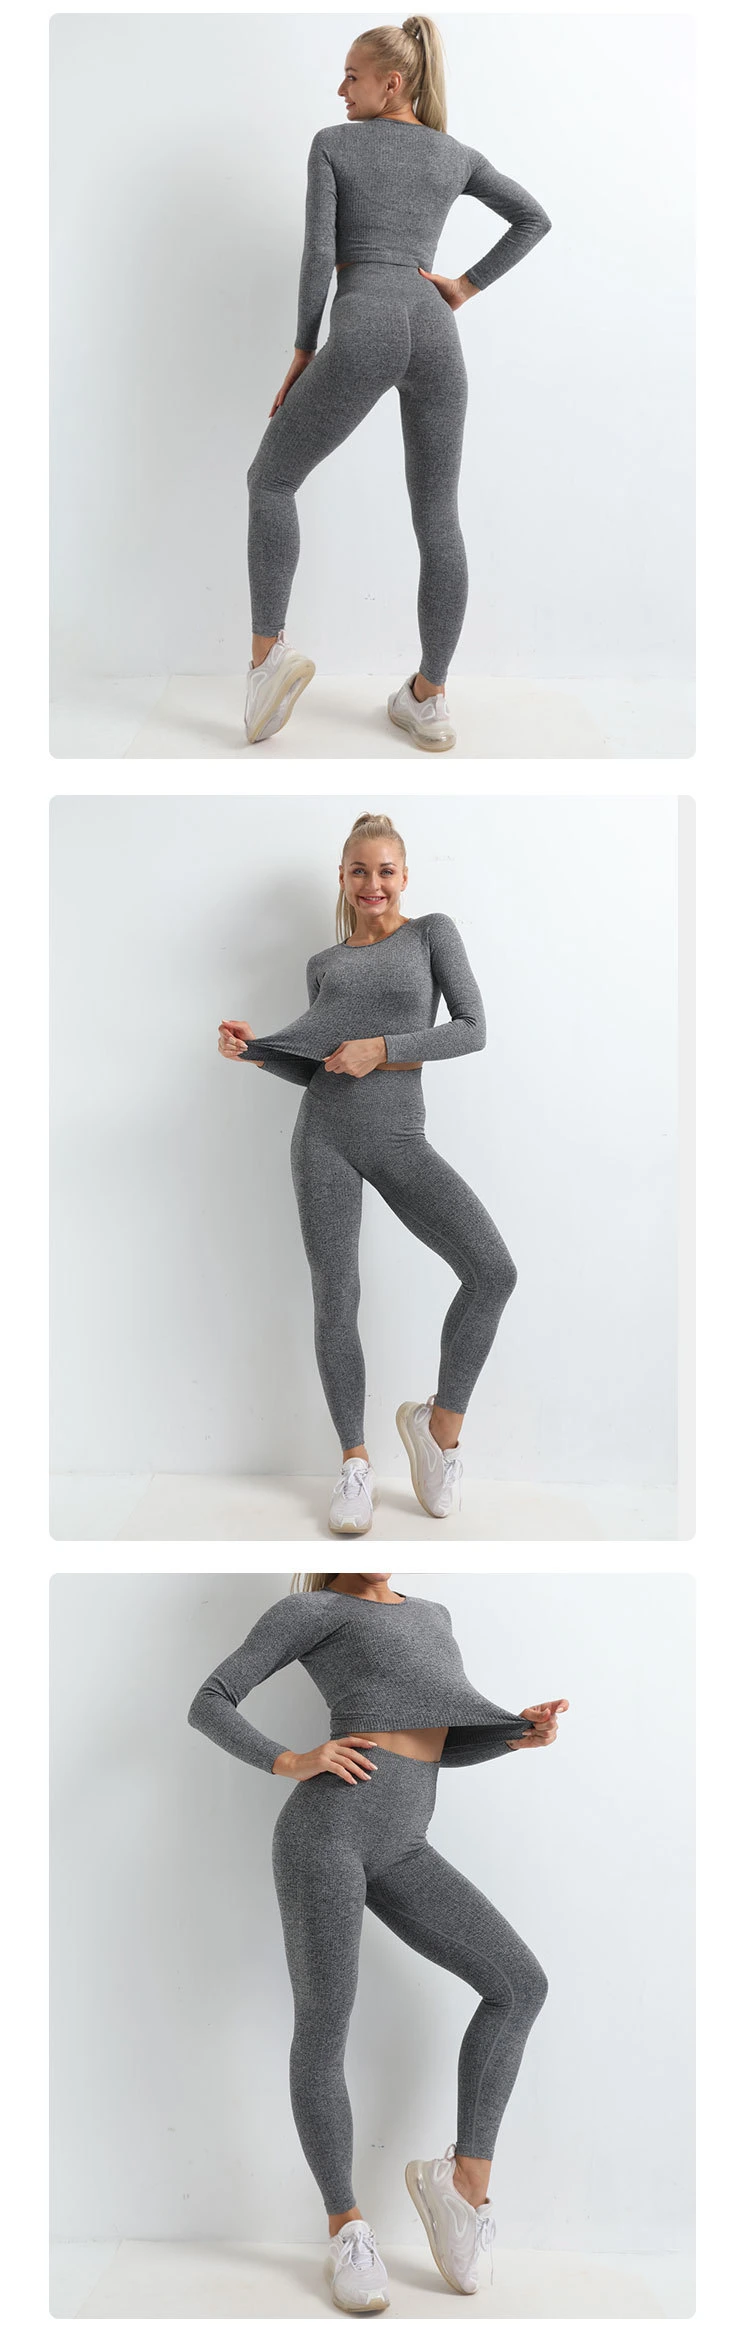 New High-Quality Seamless Striped Yoga Long-Sleeved Suit Striped High-Waisted Slim Sports Suit